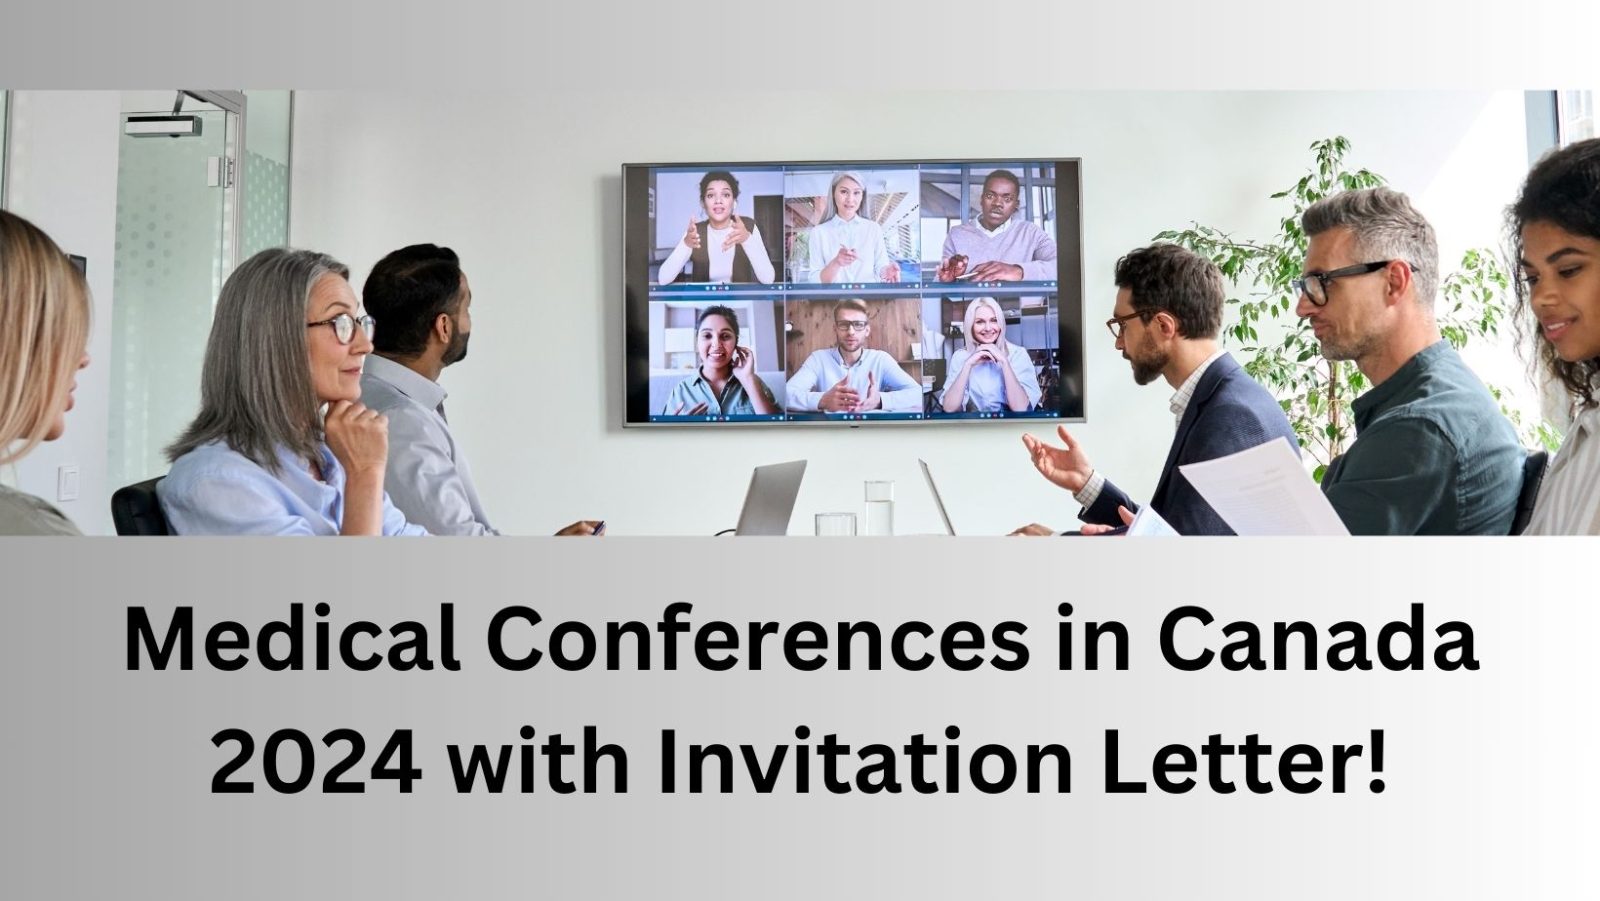 Medical Conferences in Canada 2024 with Invitation Letter!